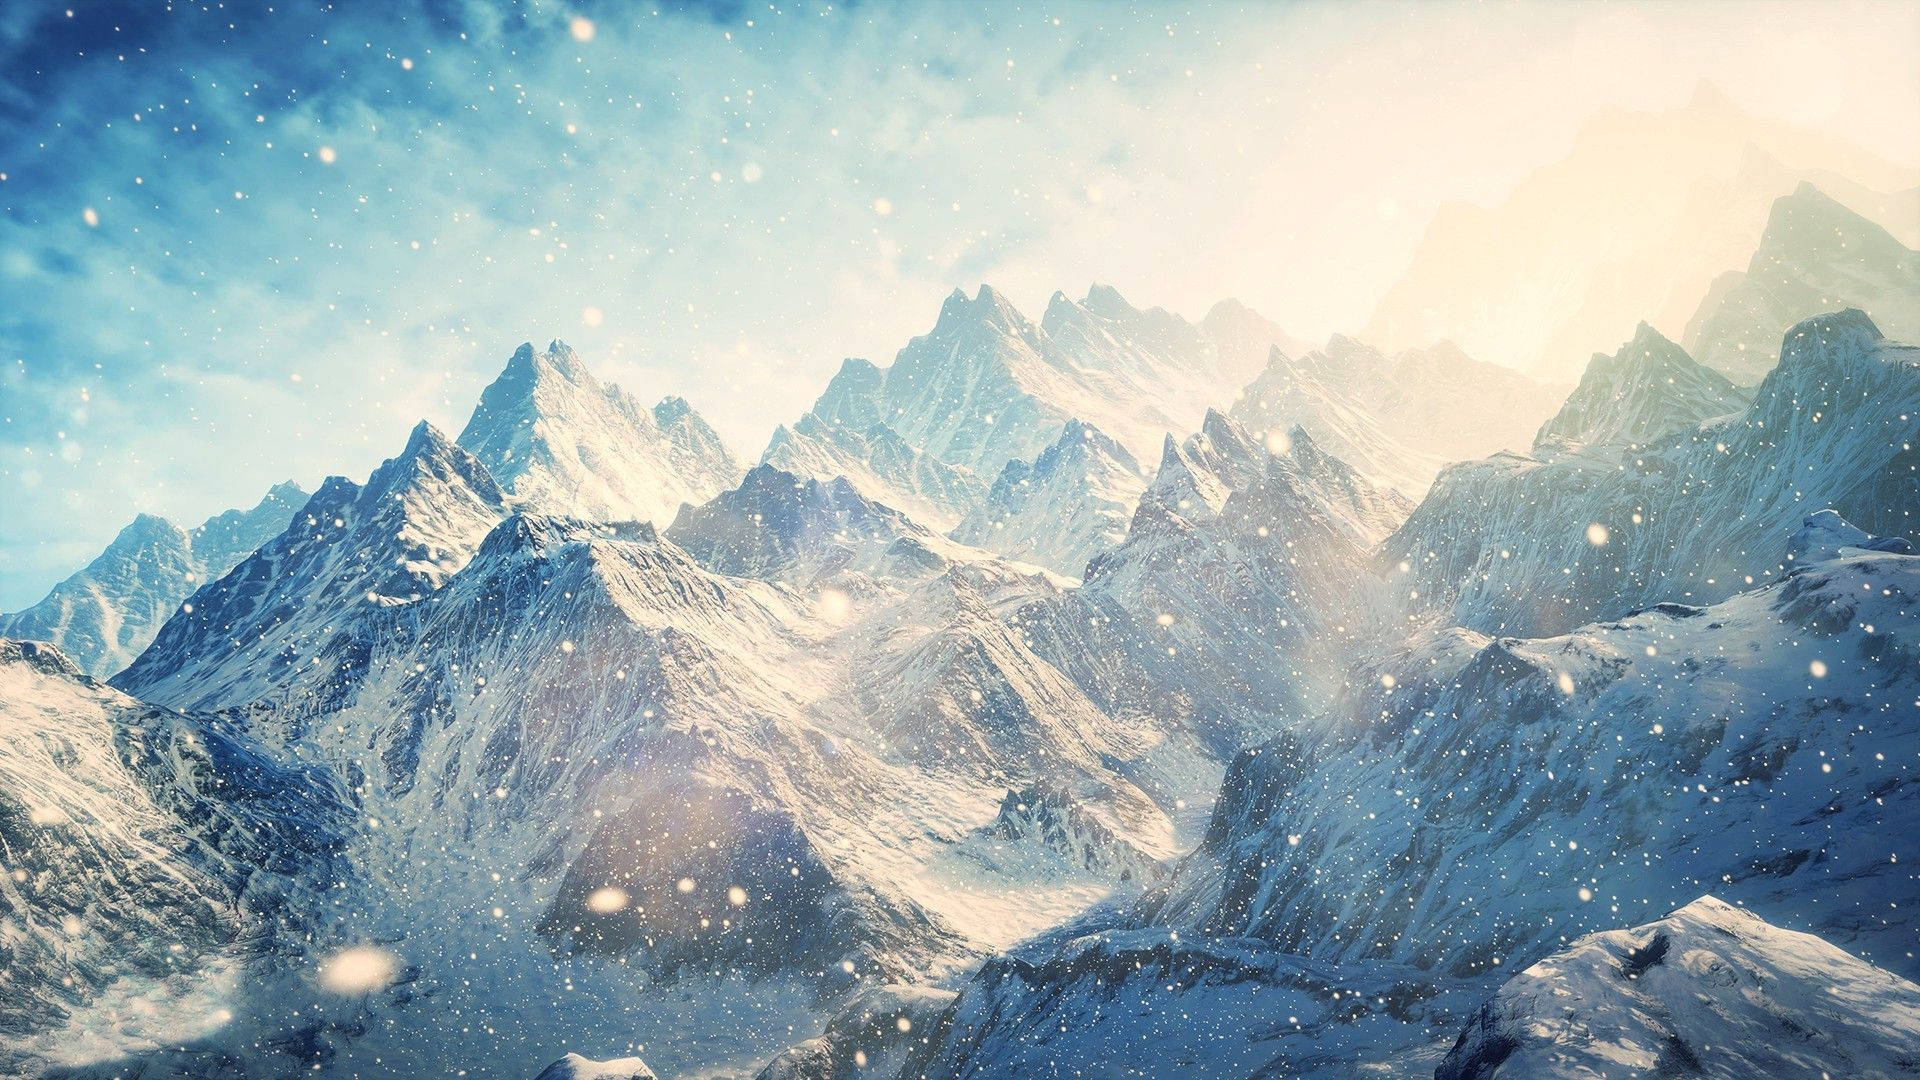 Take in the breathtaking view of the snow-capped mountain Wallpaper